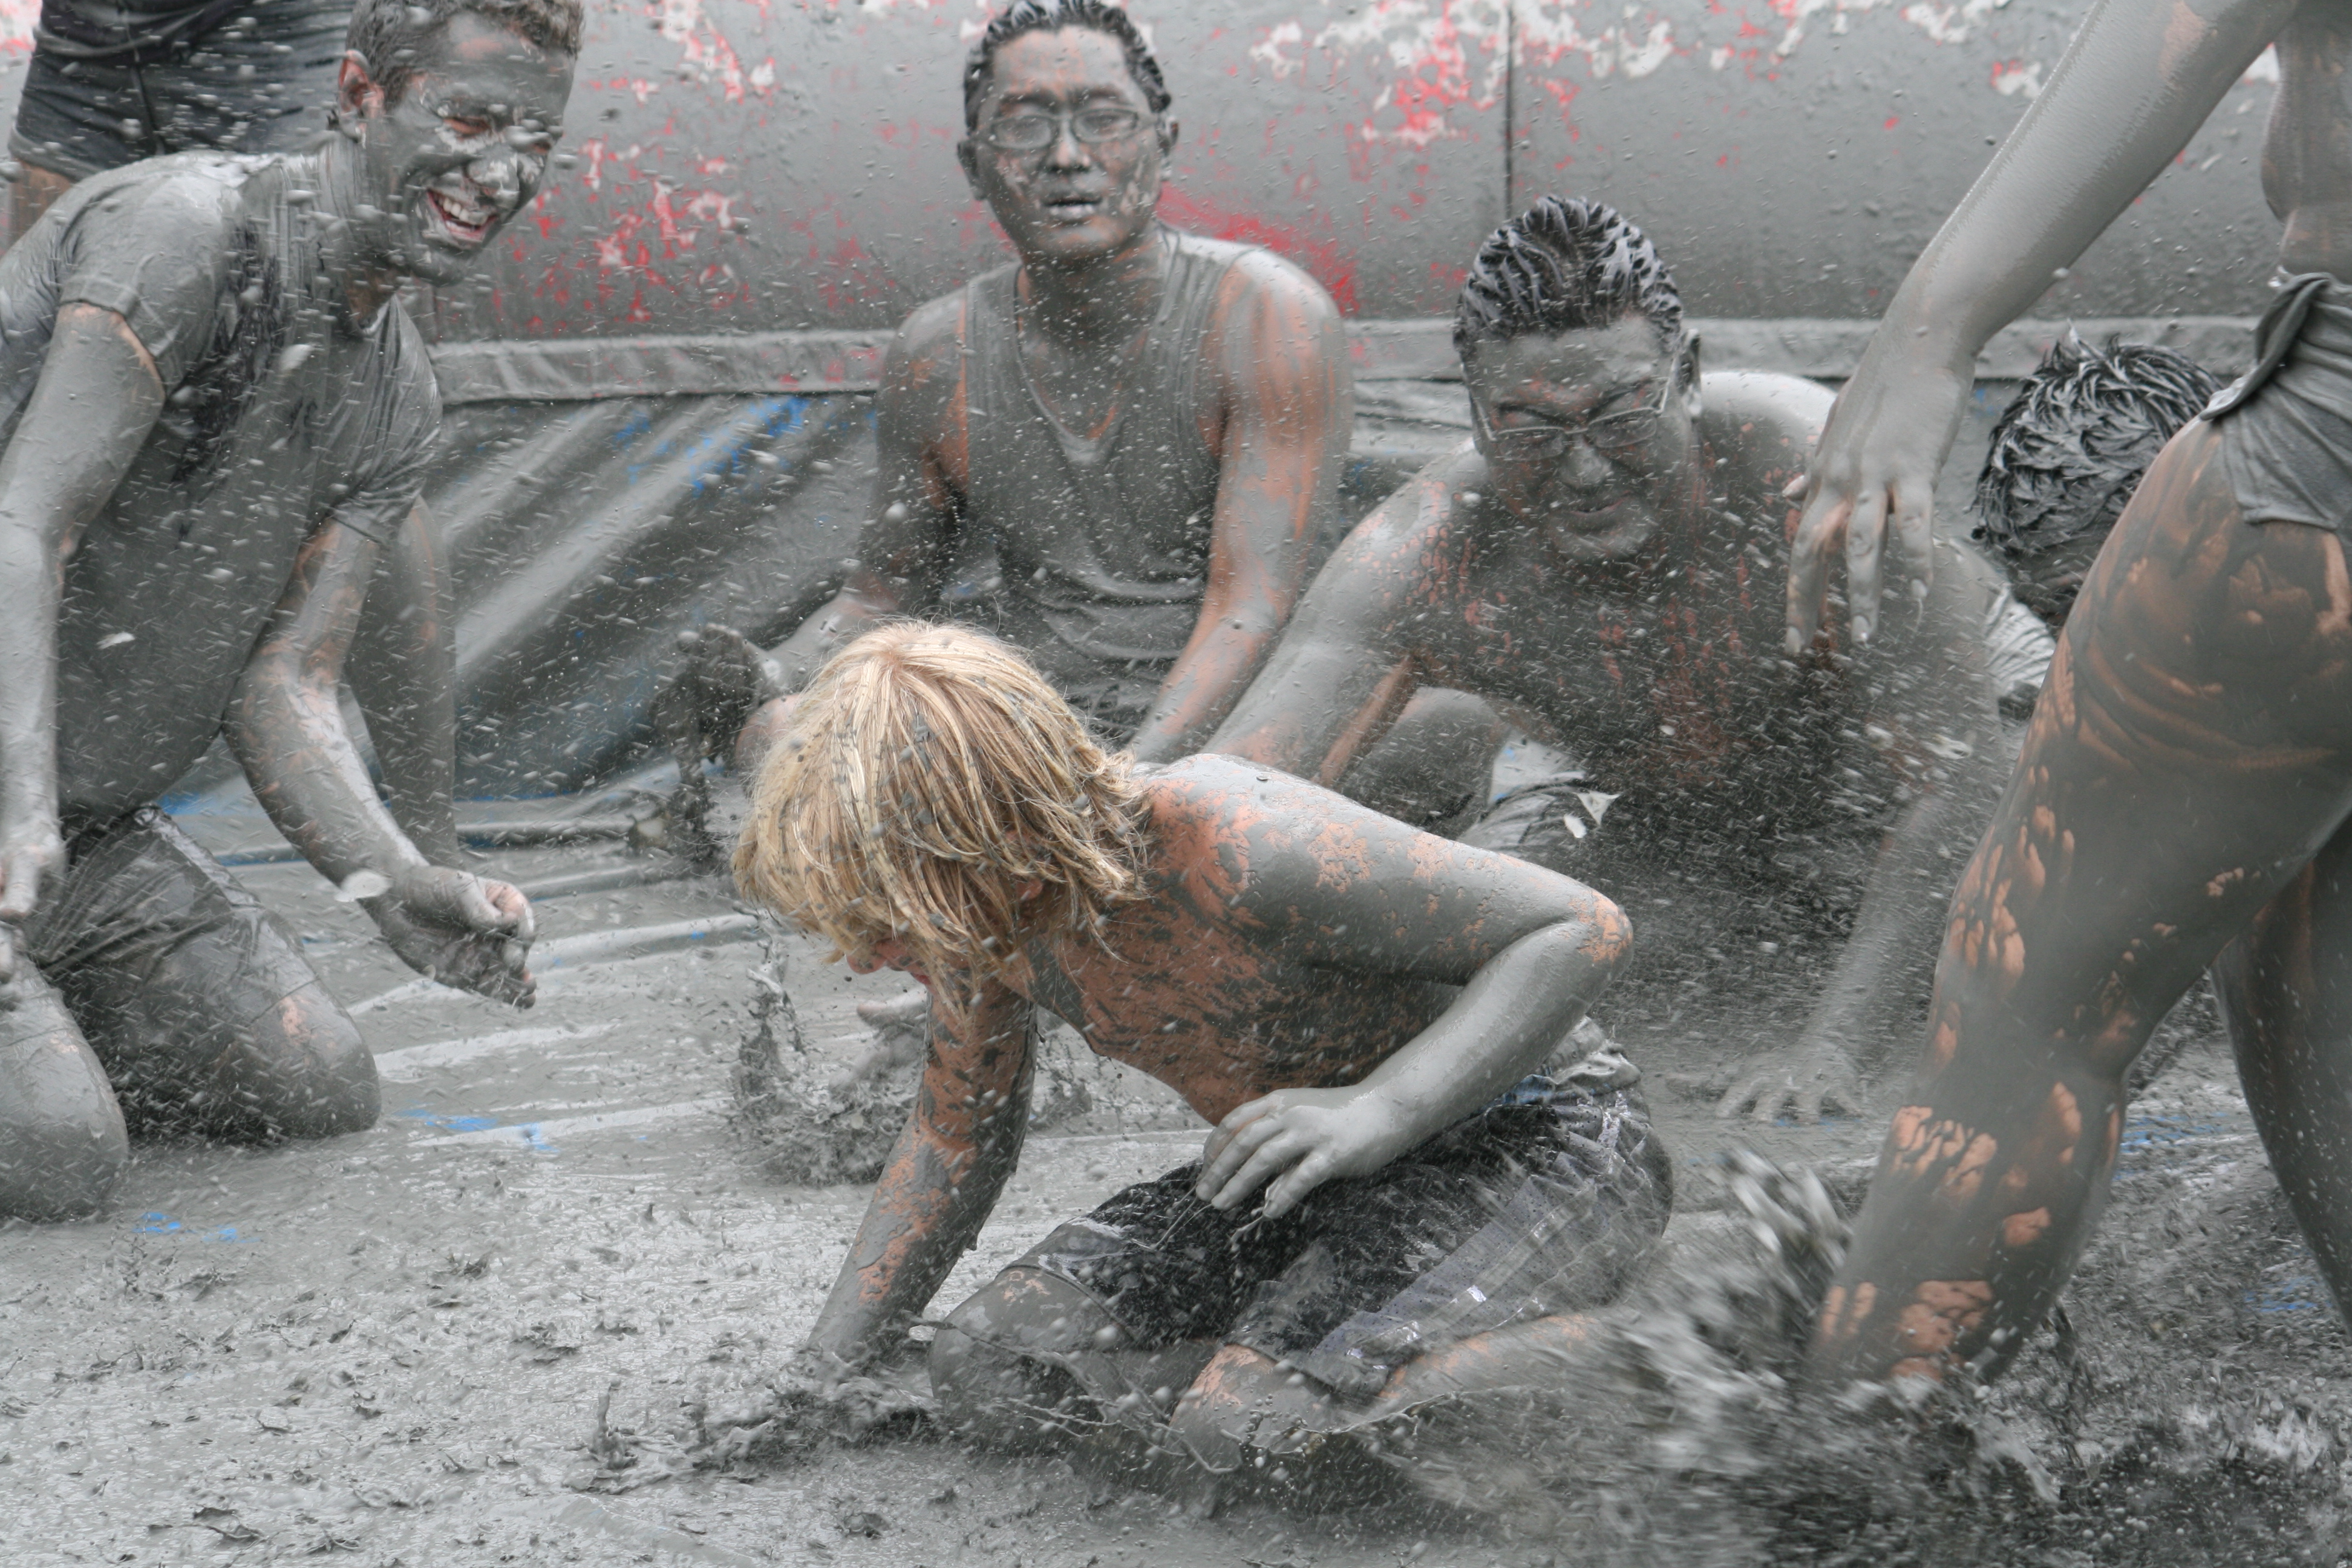 Boryeong Mud Festival - 7 Festivals From Around The World To Add To Your Bucket List